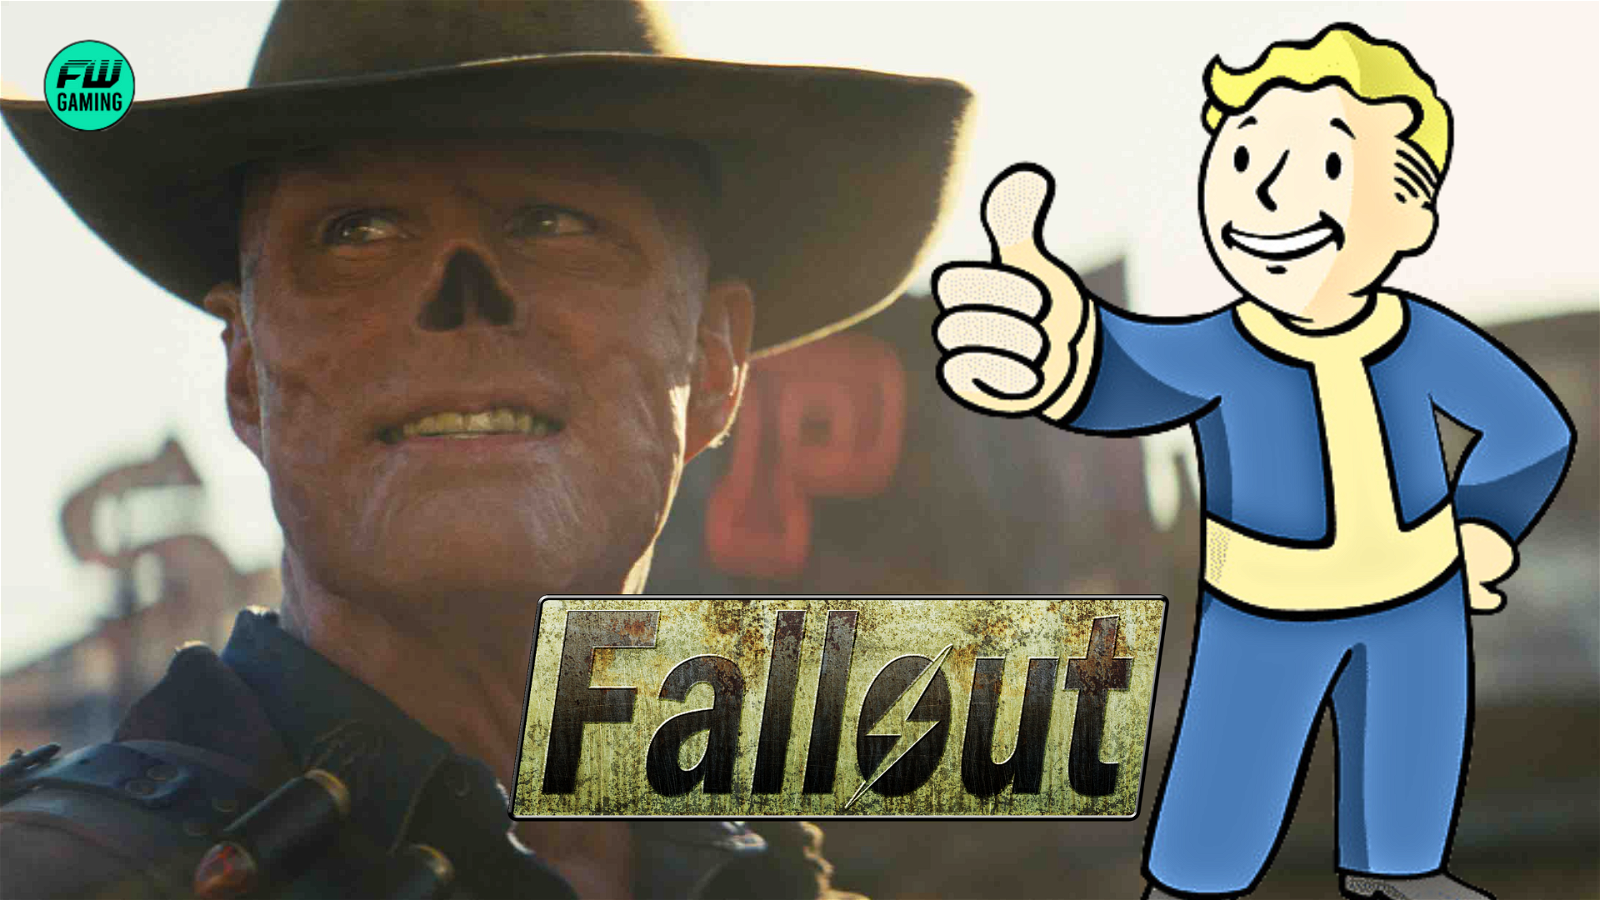 “It’s almost like we’re Fallout 5”: Jonathan Nolan Cements the Amazon Prime Show in the Same Universe as the Games With One Simple Explanation